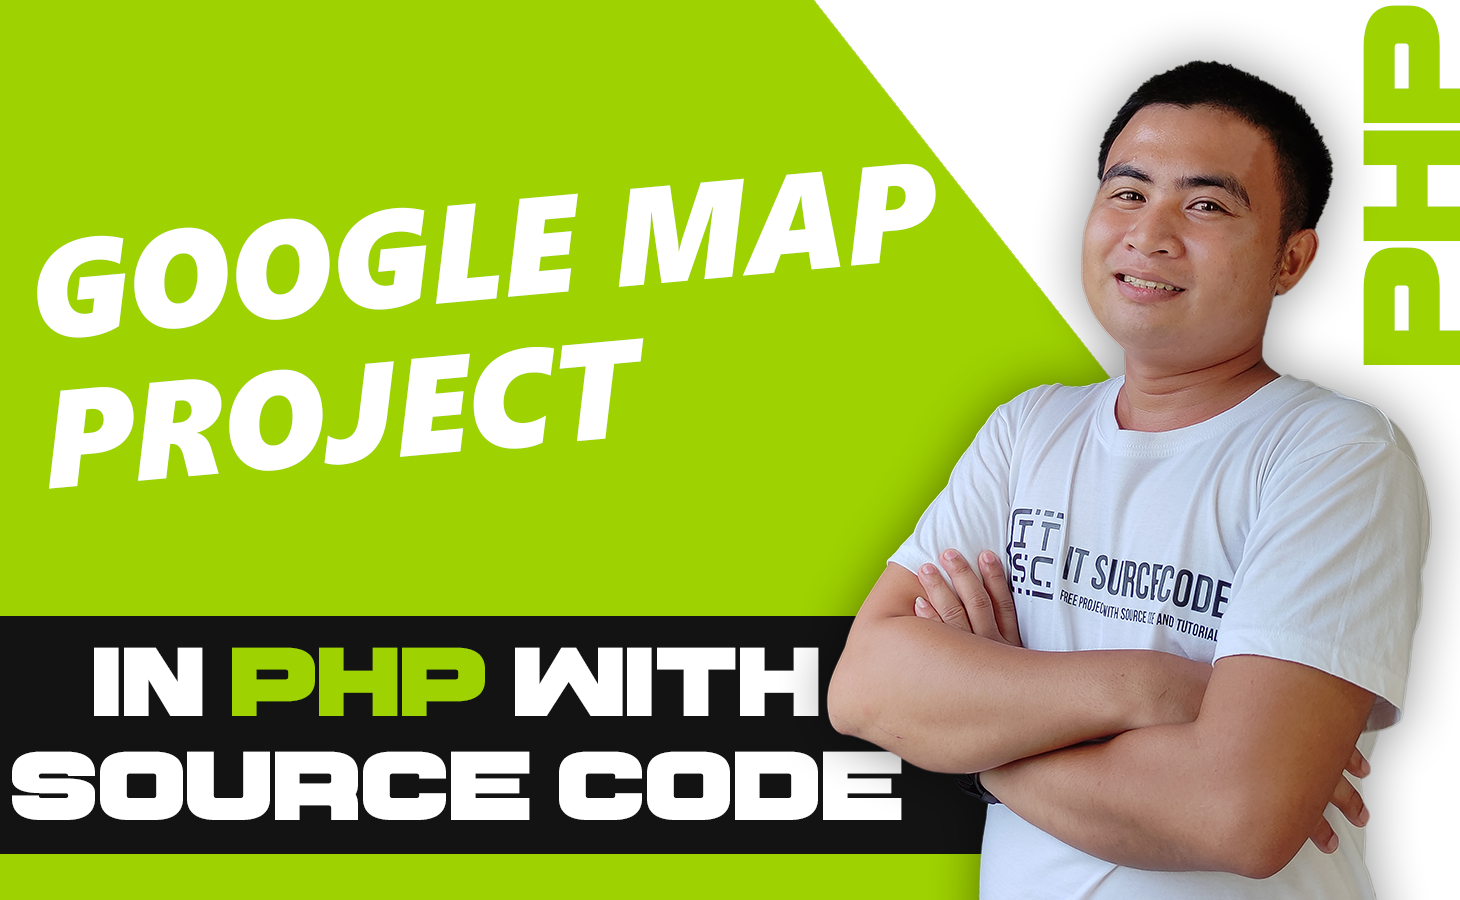 Google Map For PHP With Source Code 